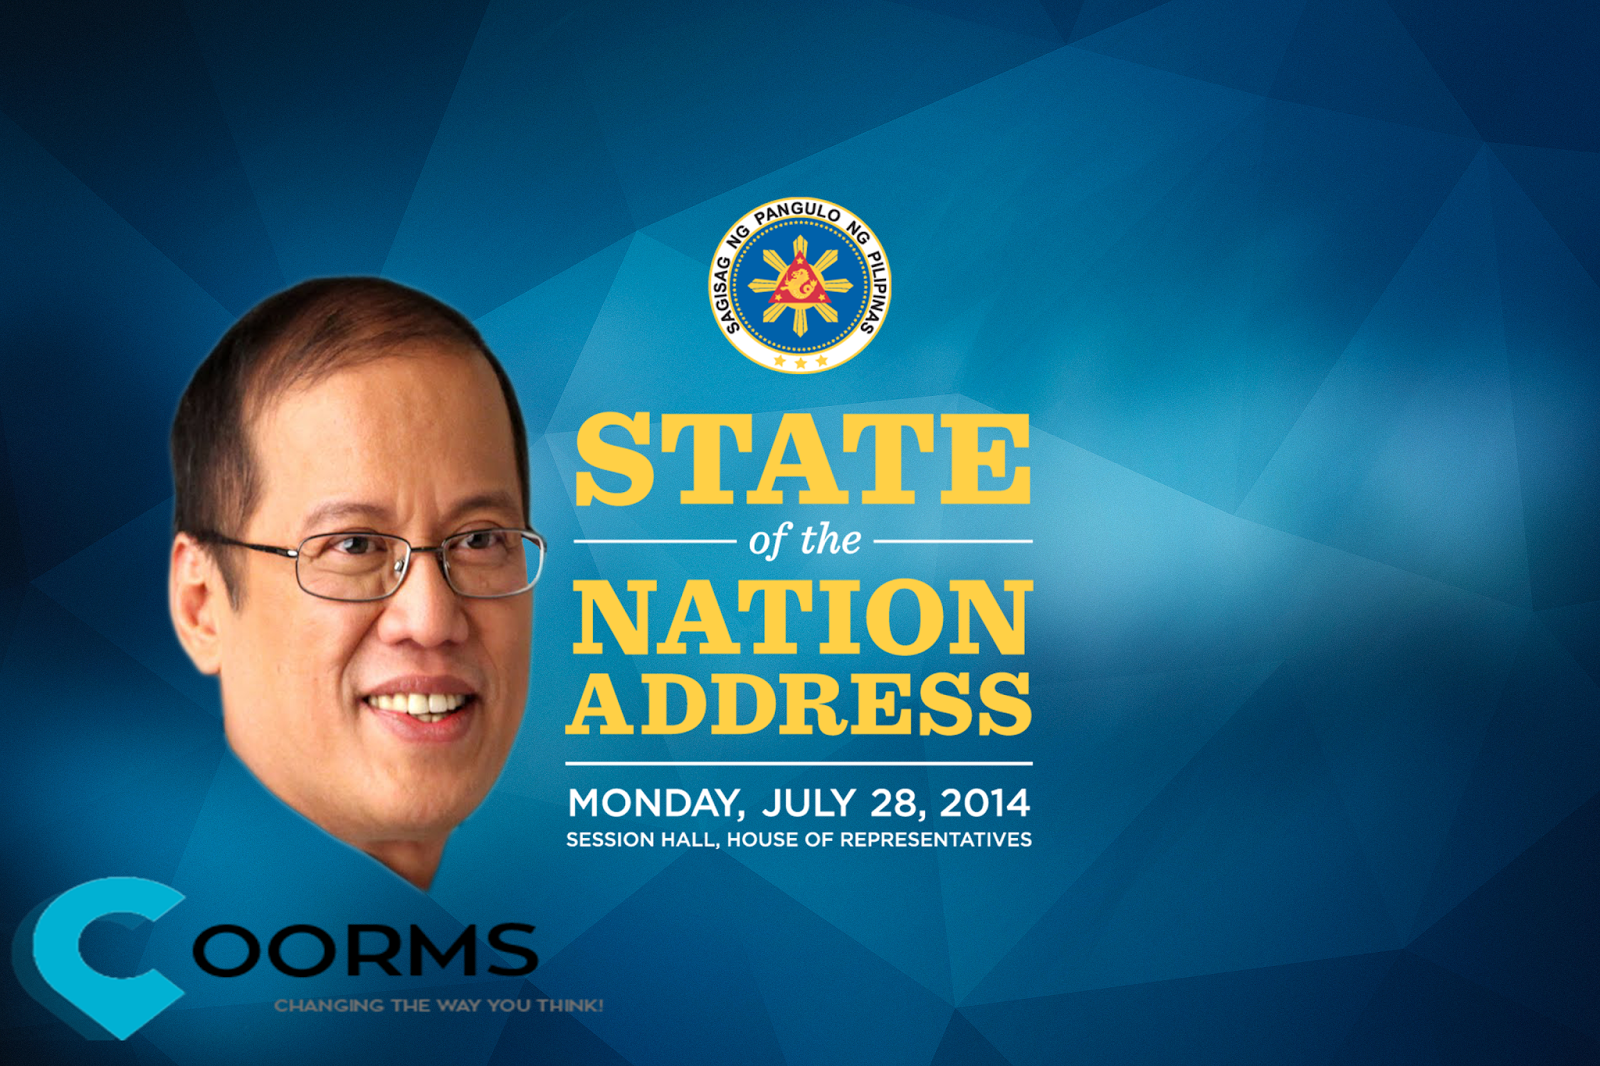 Watch the official live streaming of President Benigno "Noynoy" Aquino III's 5th State of the Nation Address (SONA 2014) live at the Malacañang Palace on Monday, July 28, 2014.